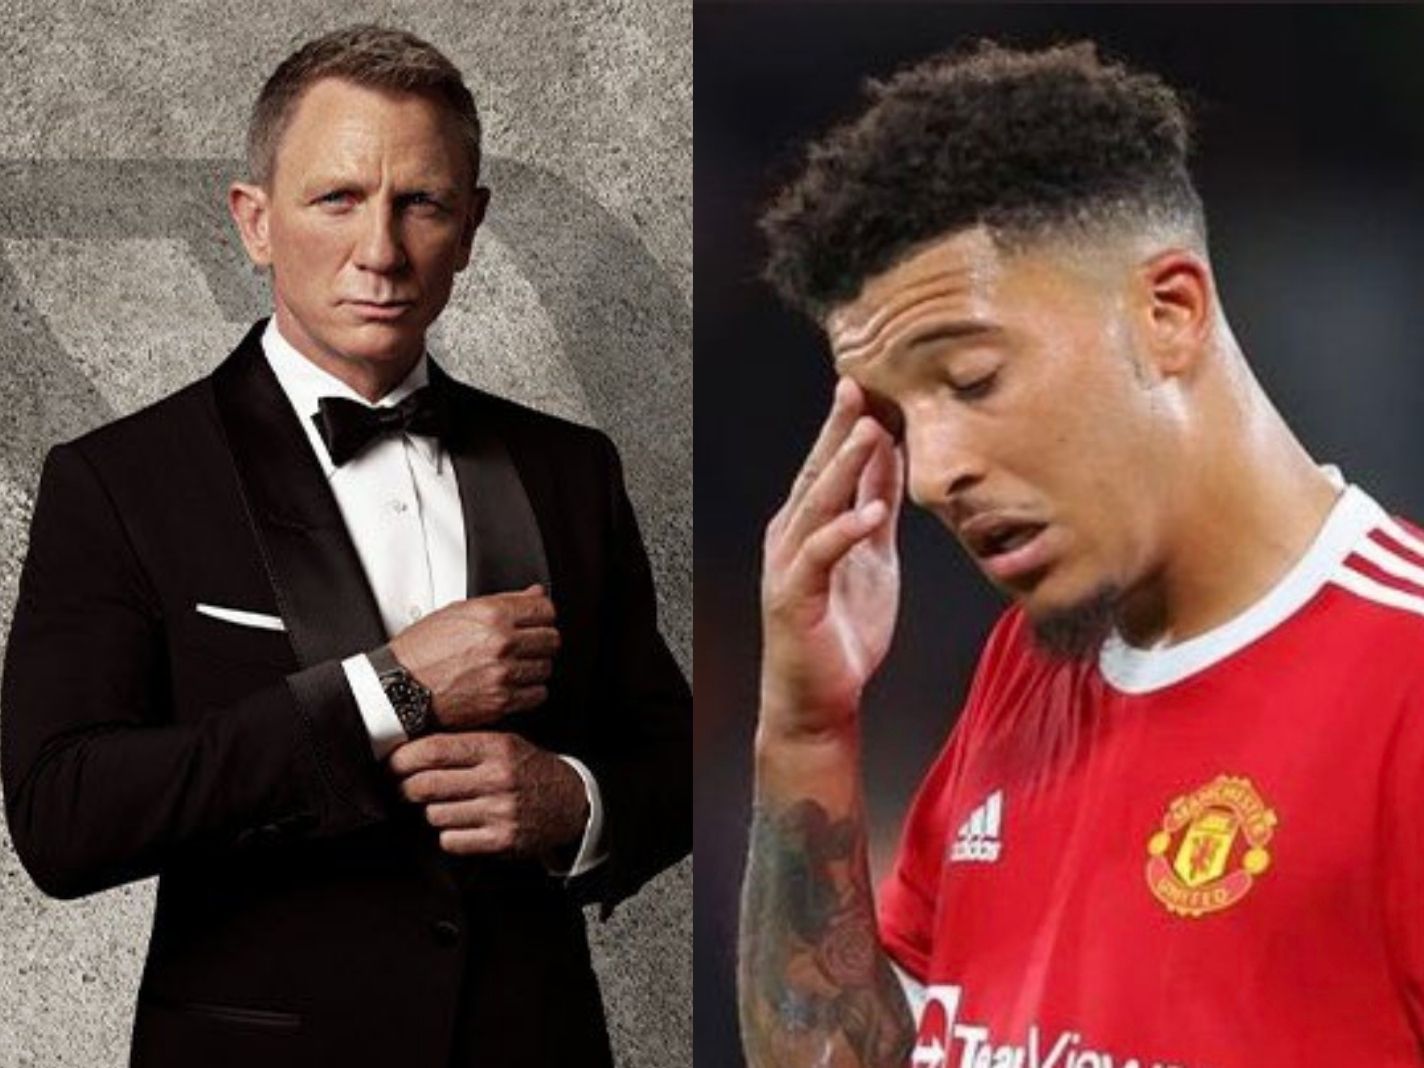 Jadon Sancho hung out to dry with cruel 007 meme by German news channel